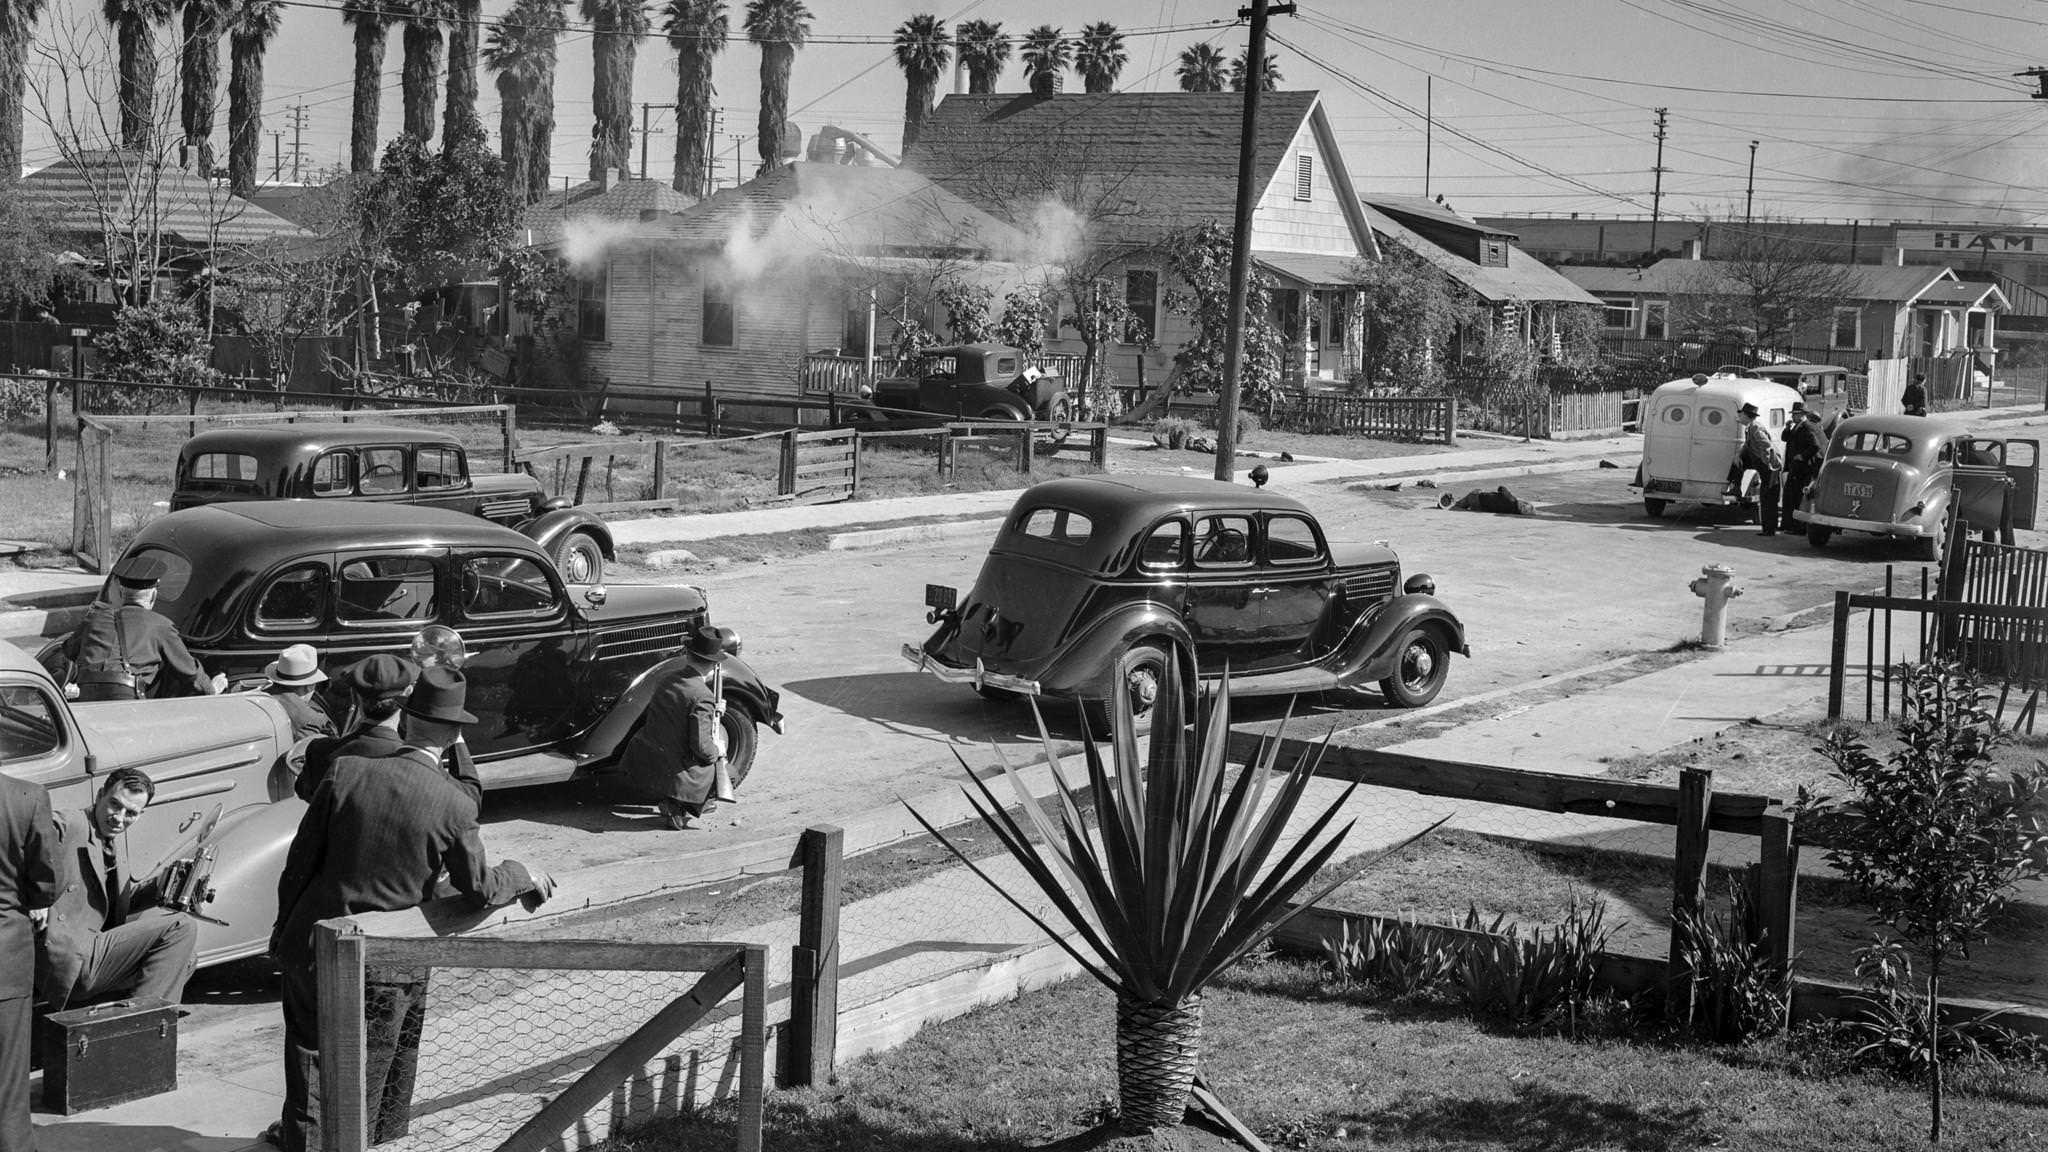 Police trade shots with barricaded suspect, Los Angeles, Feb. 17, 1938